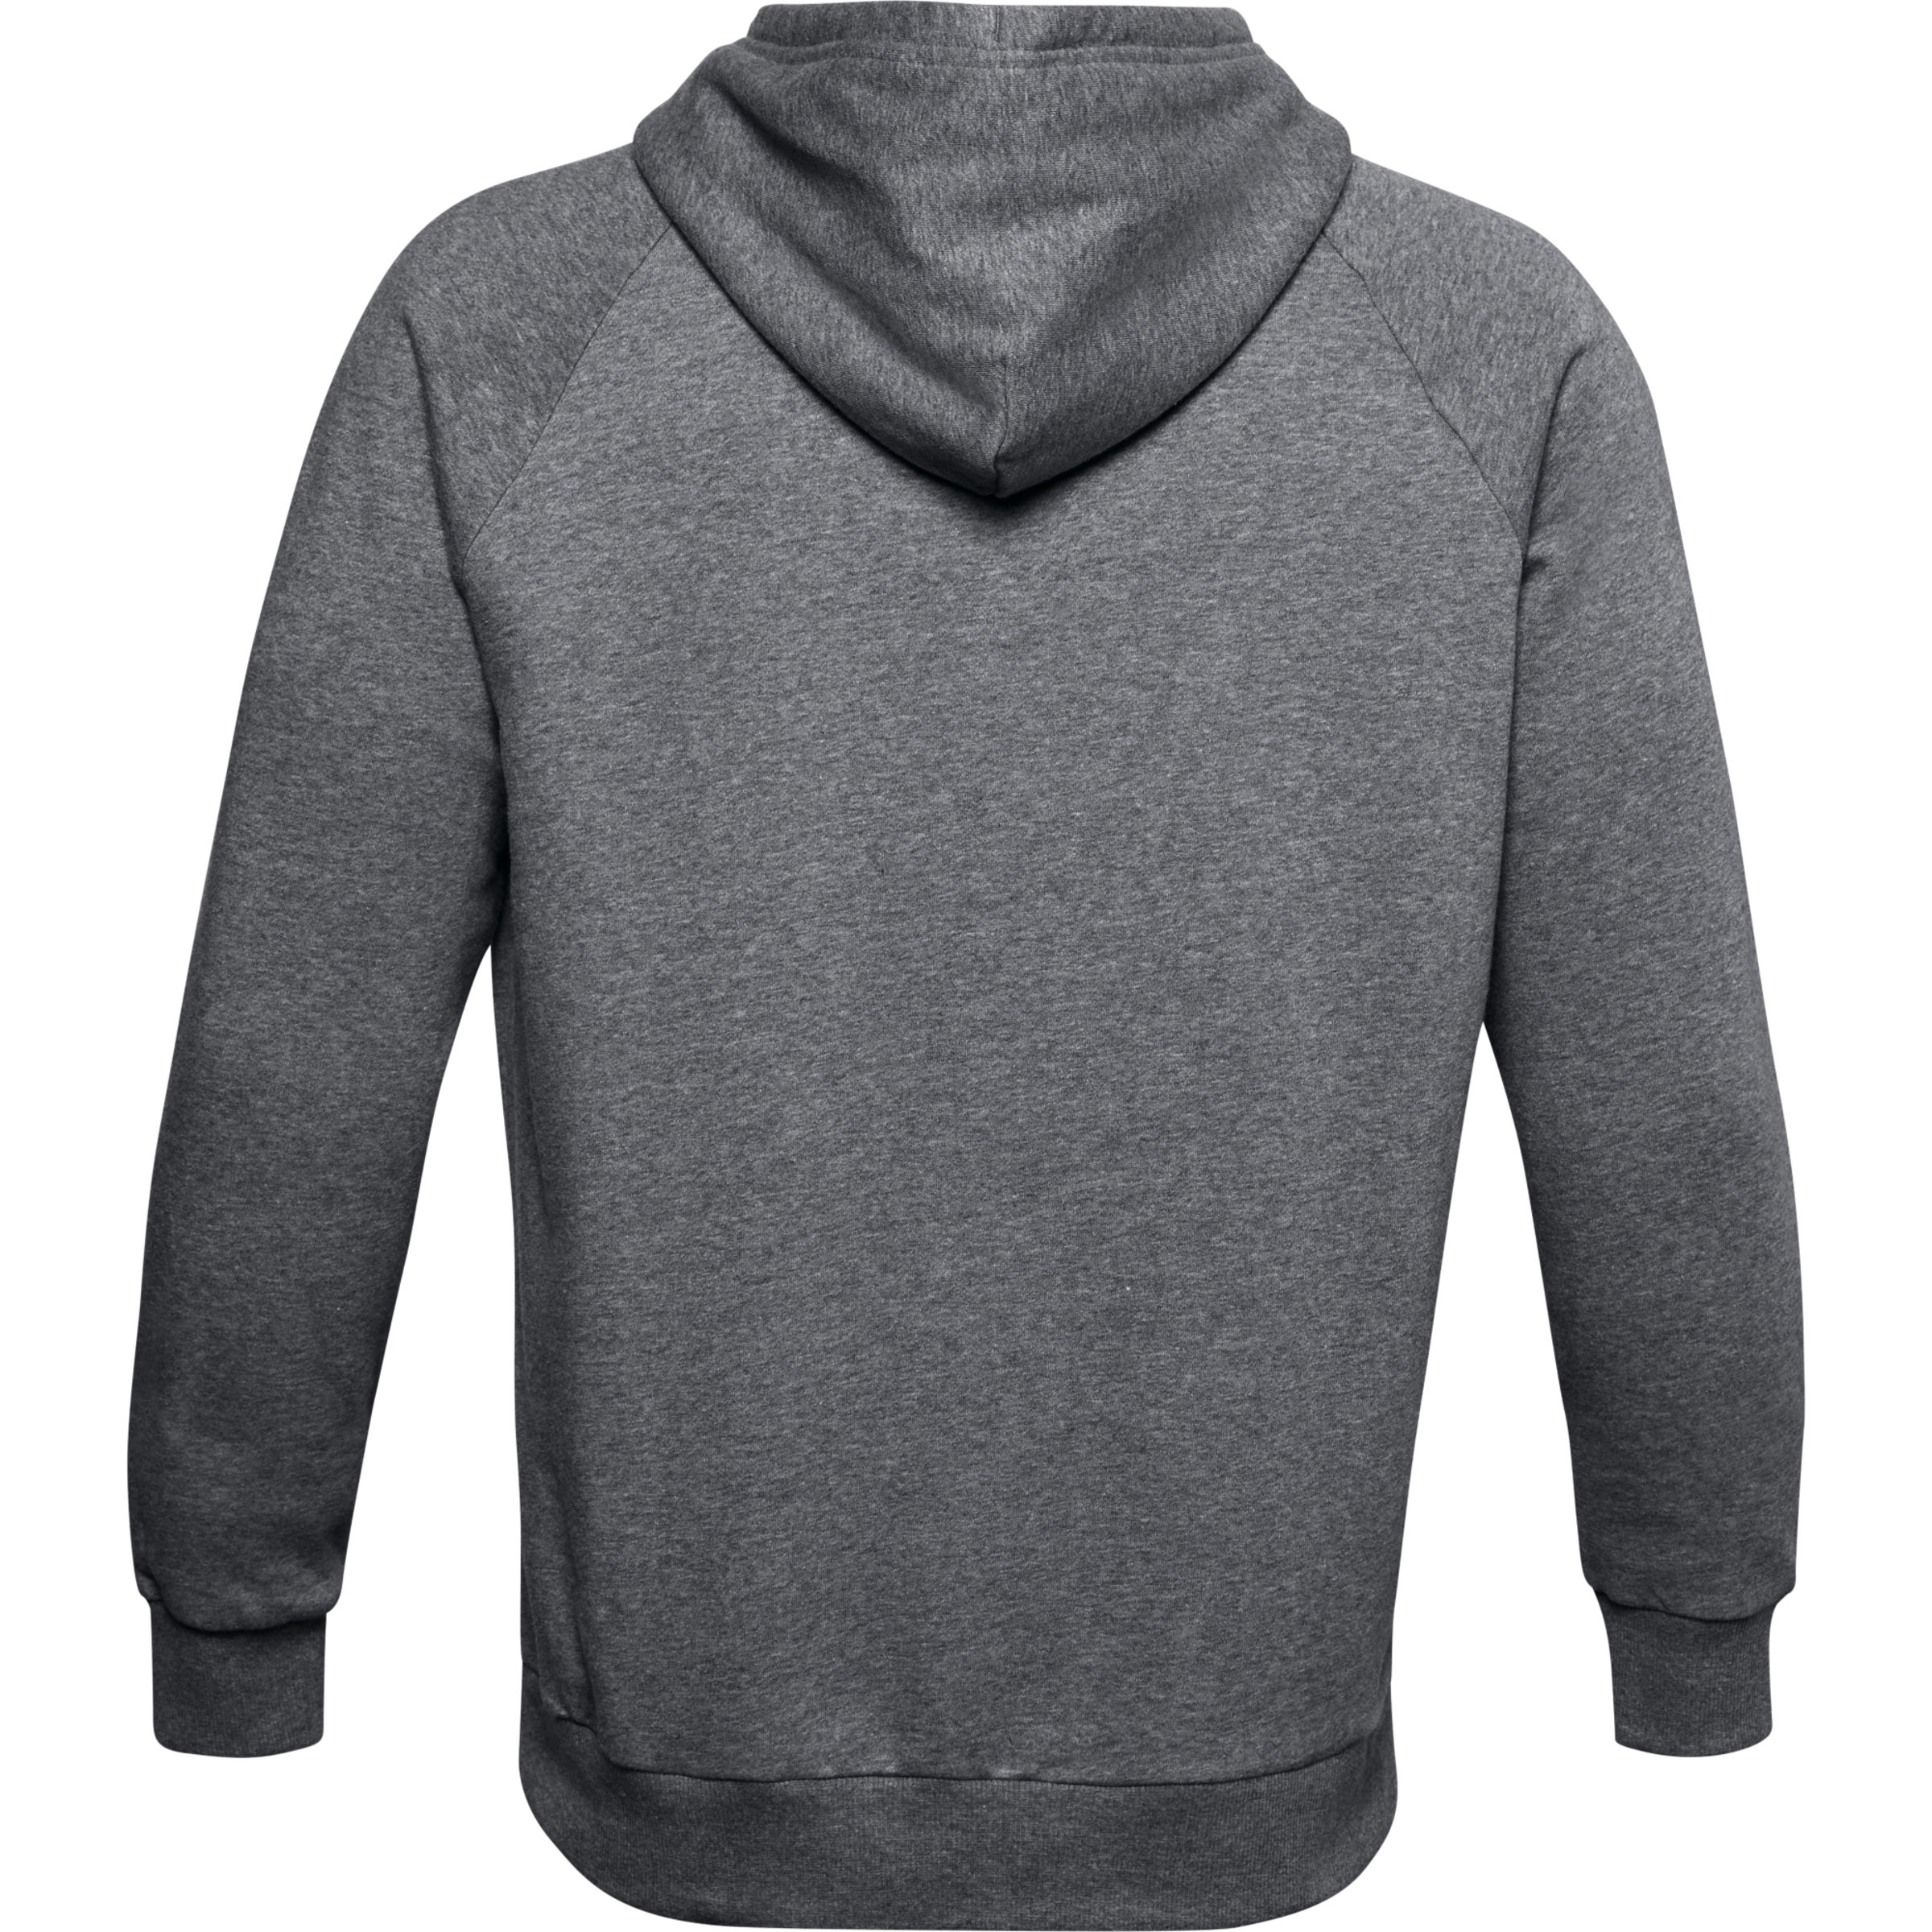 Under Armour Rival Fleece Hoodie Pullover Gray Heather